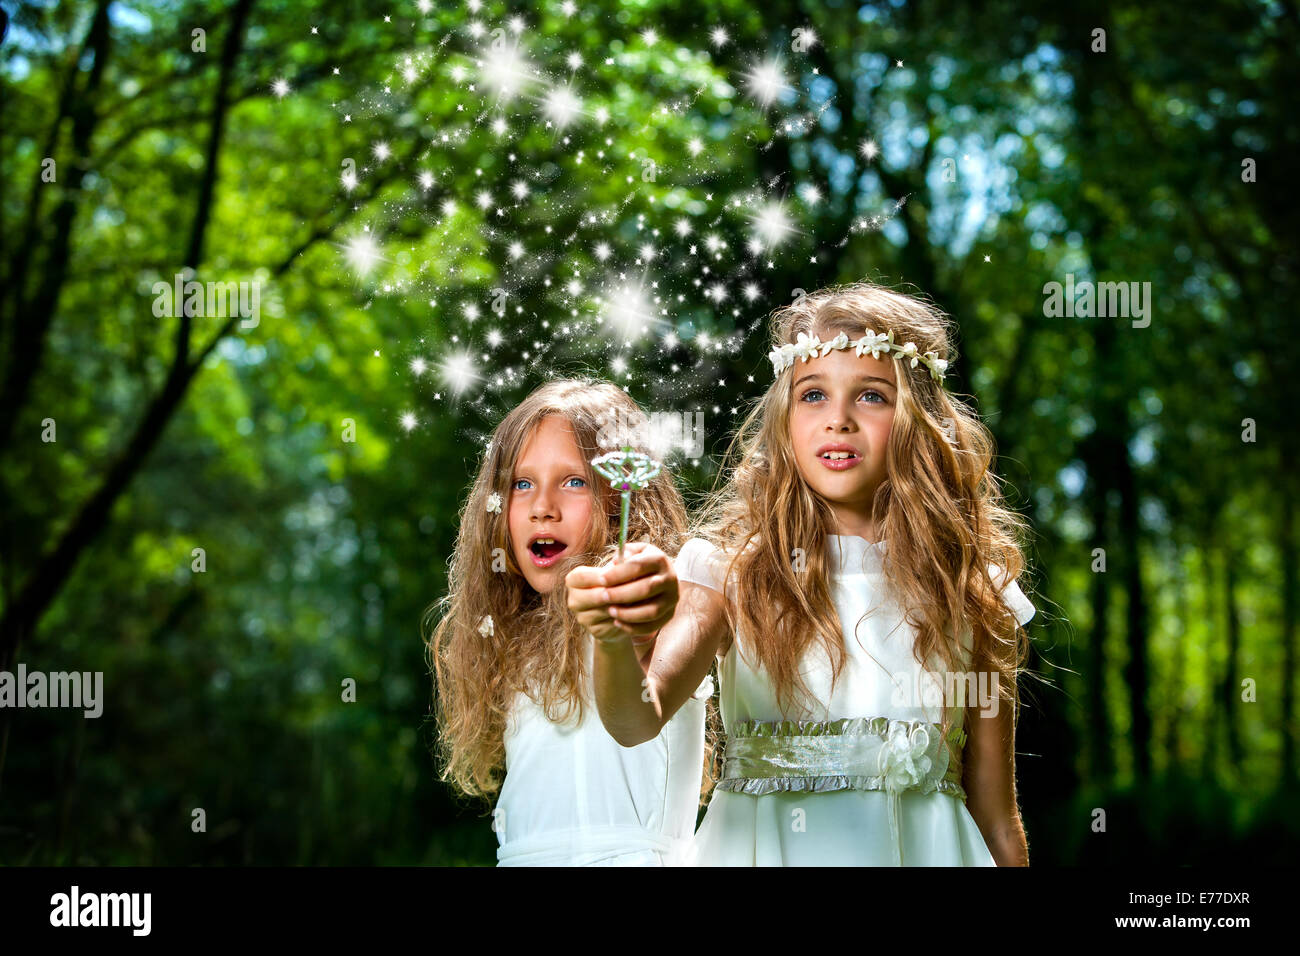 Fantasy portrait of cute girls with magic wand in forest. Stock Photo